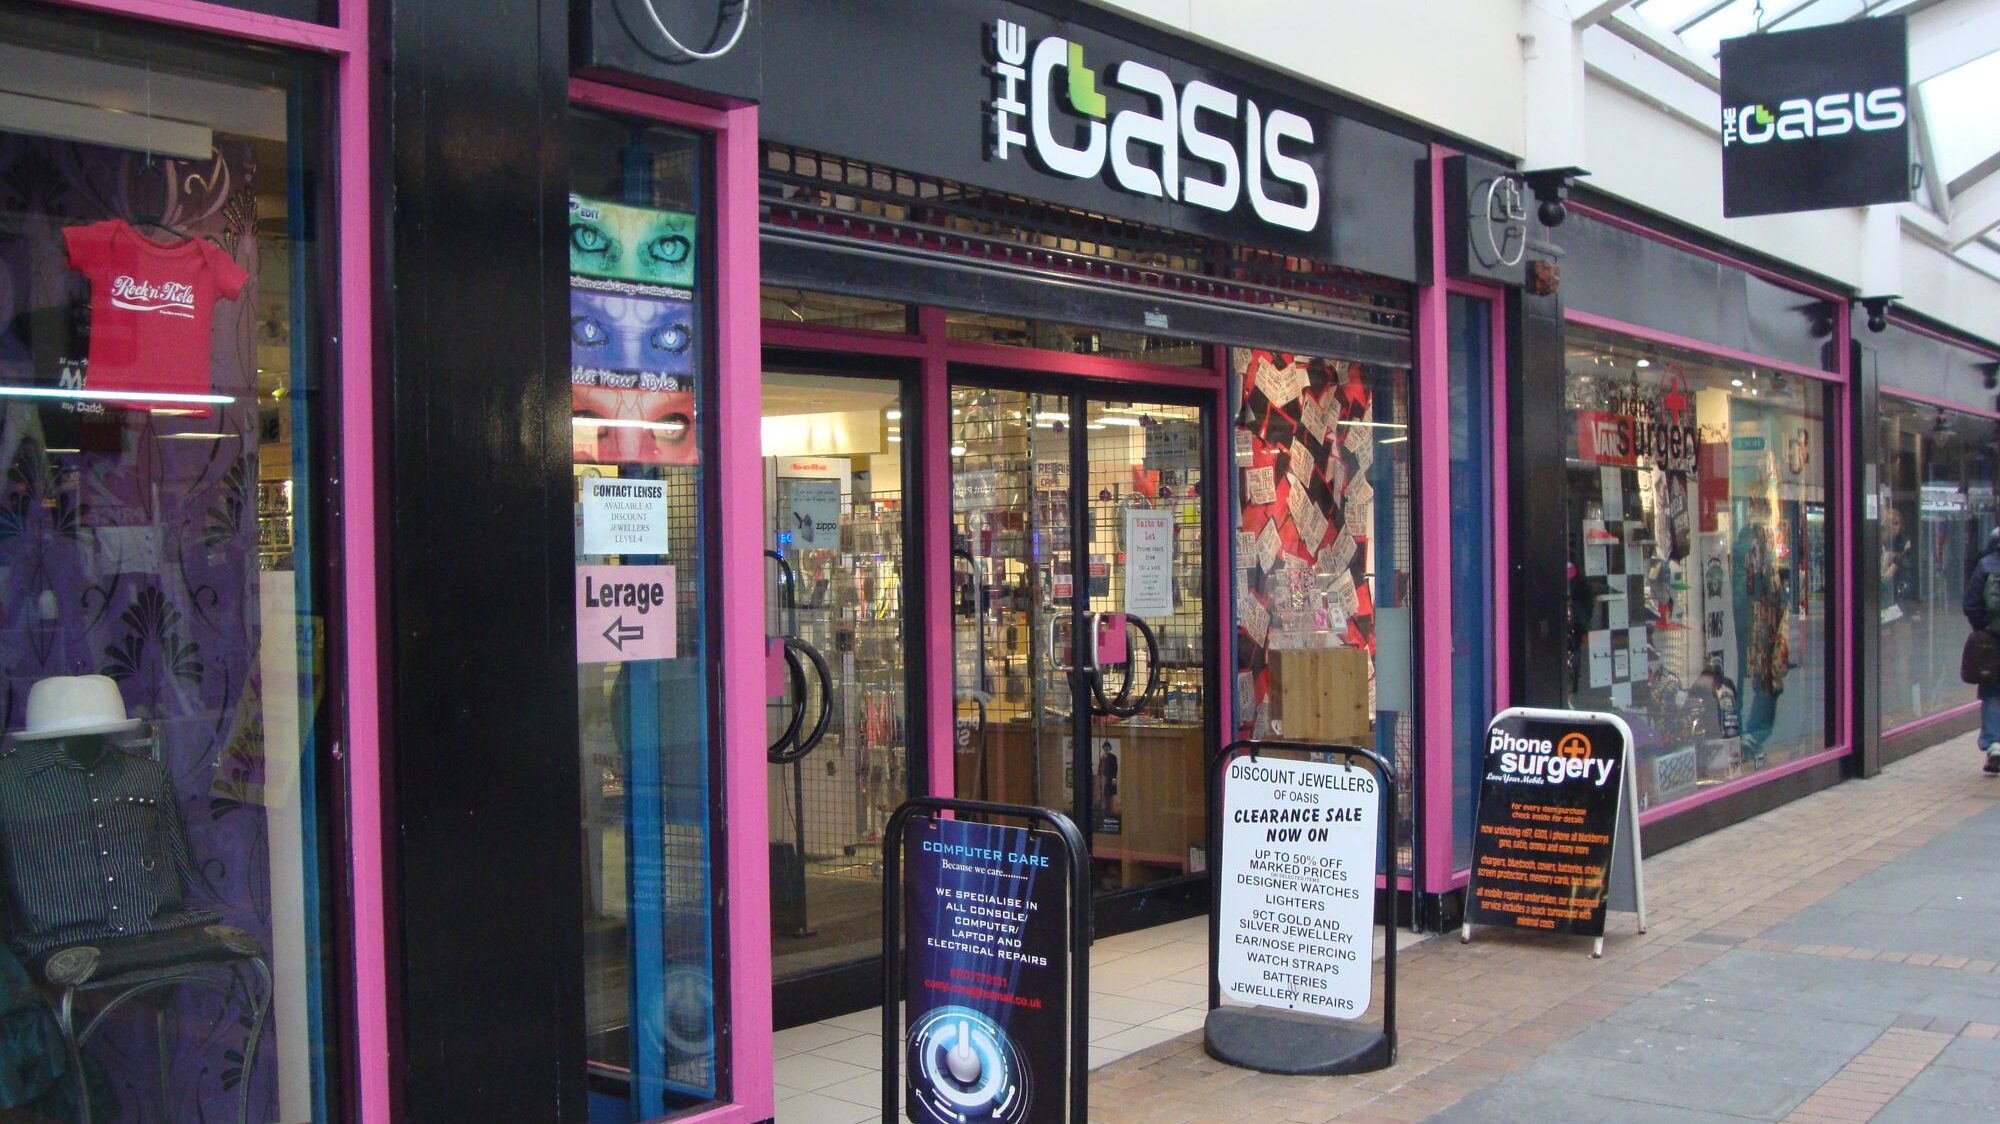 The Oasis in Square Shopping Centre, Birmingham has over 20 independent retailers from vintage fashion to jewellery and general geekery.